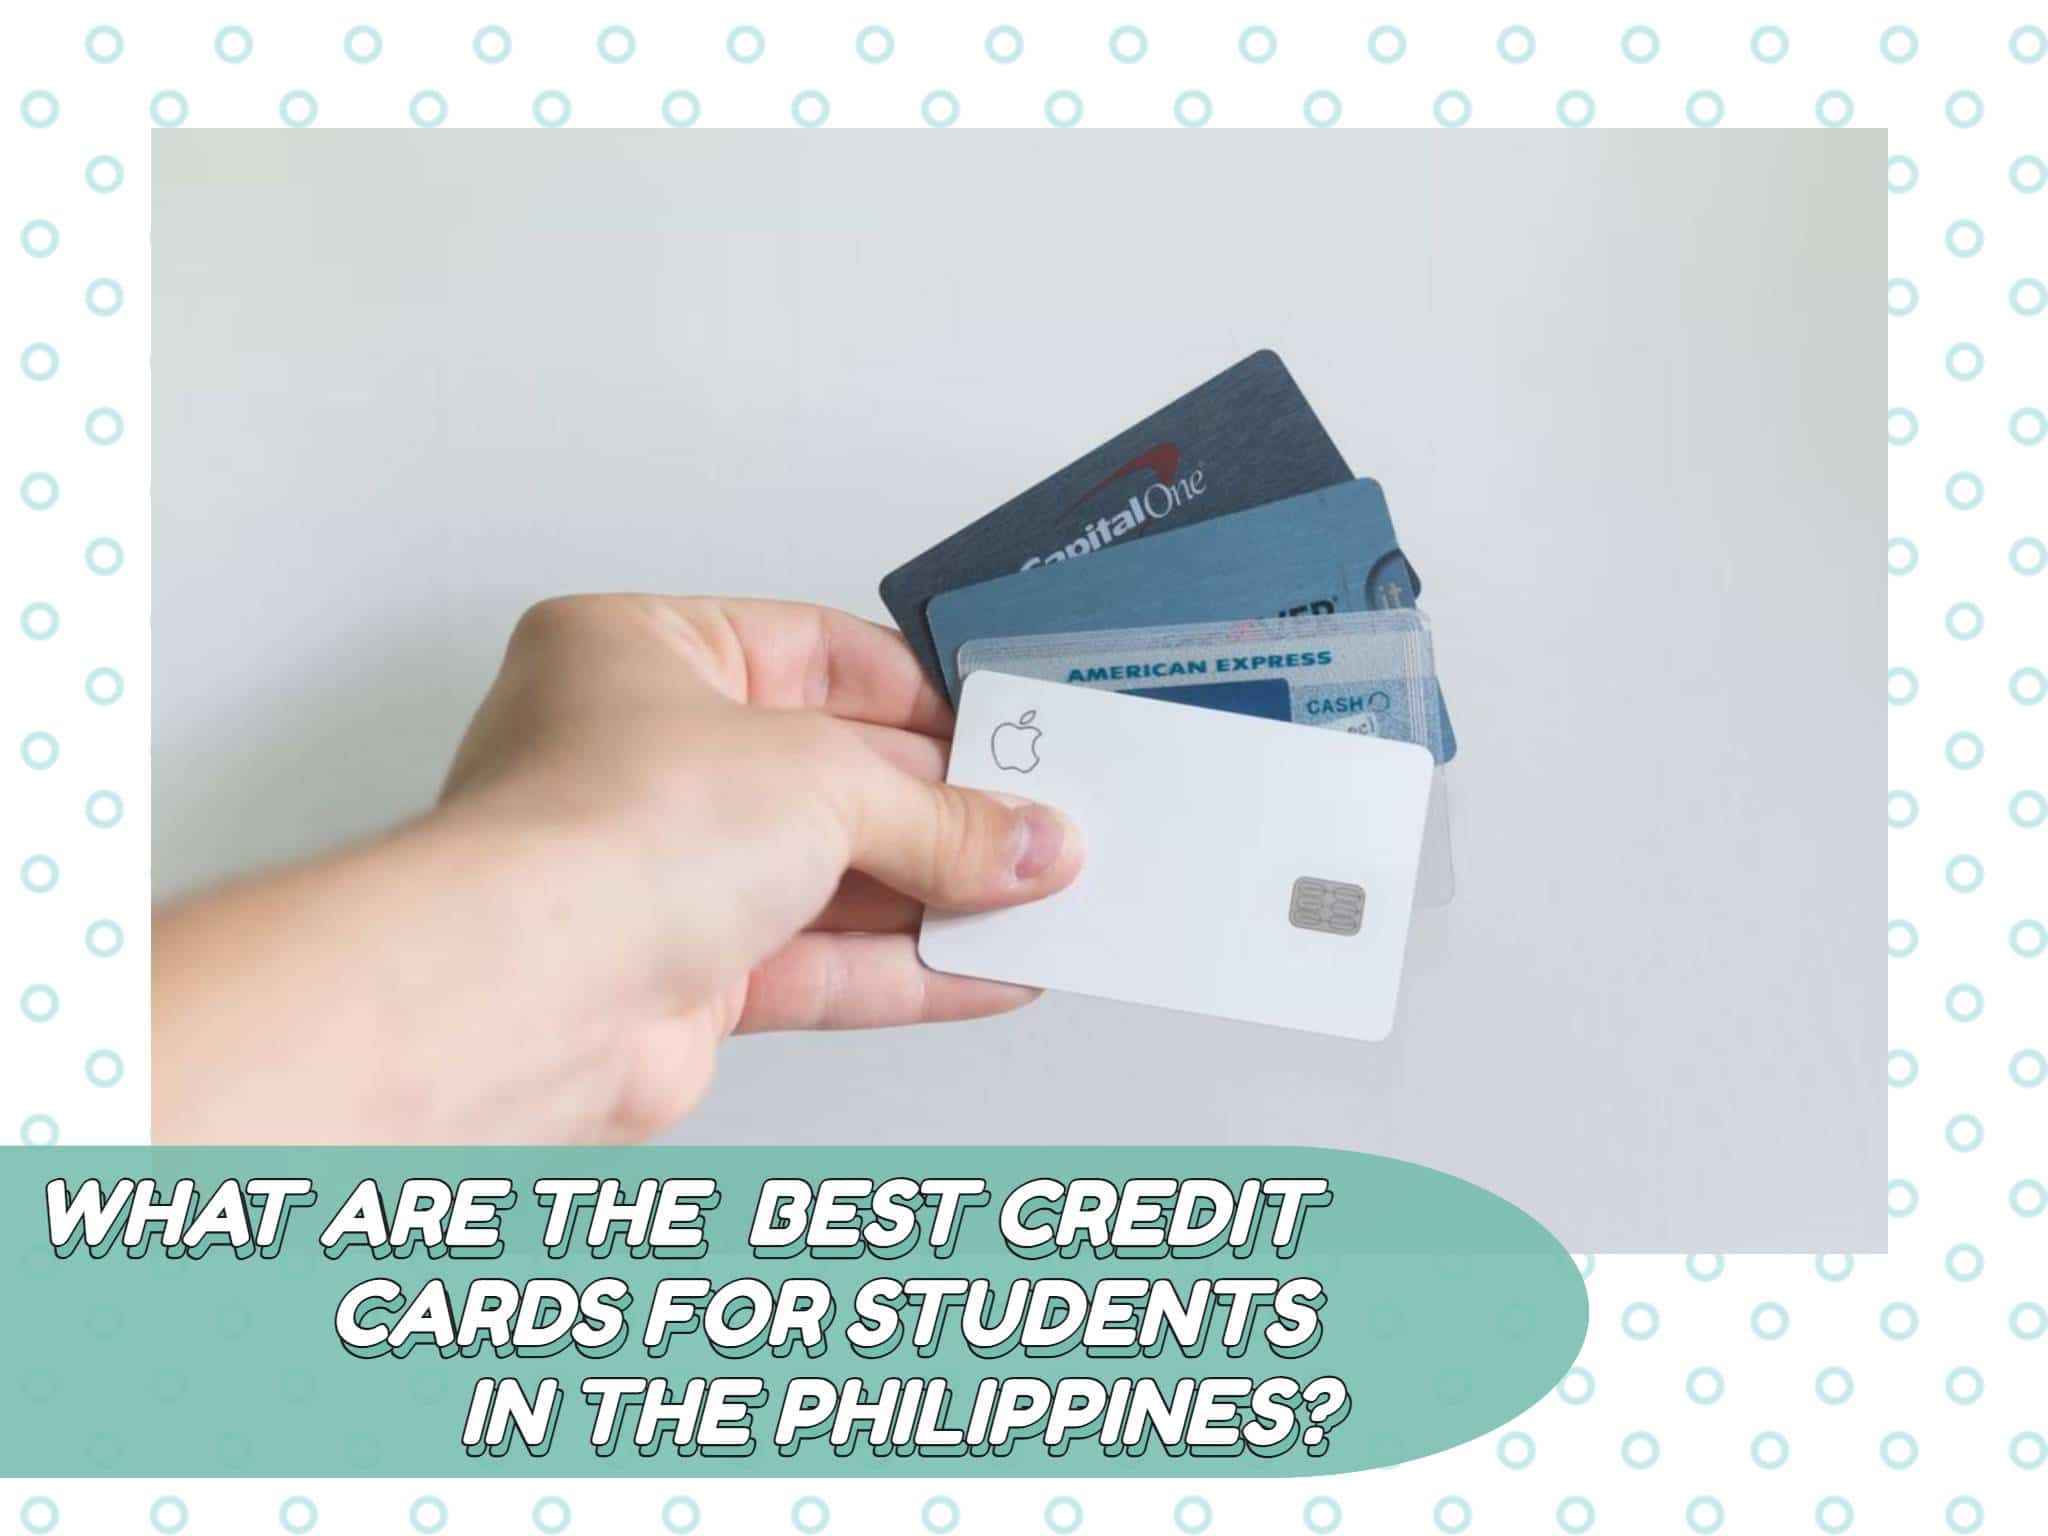 What are the Best Credit Cards for Students in the Philippines?